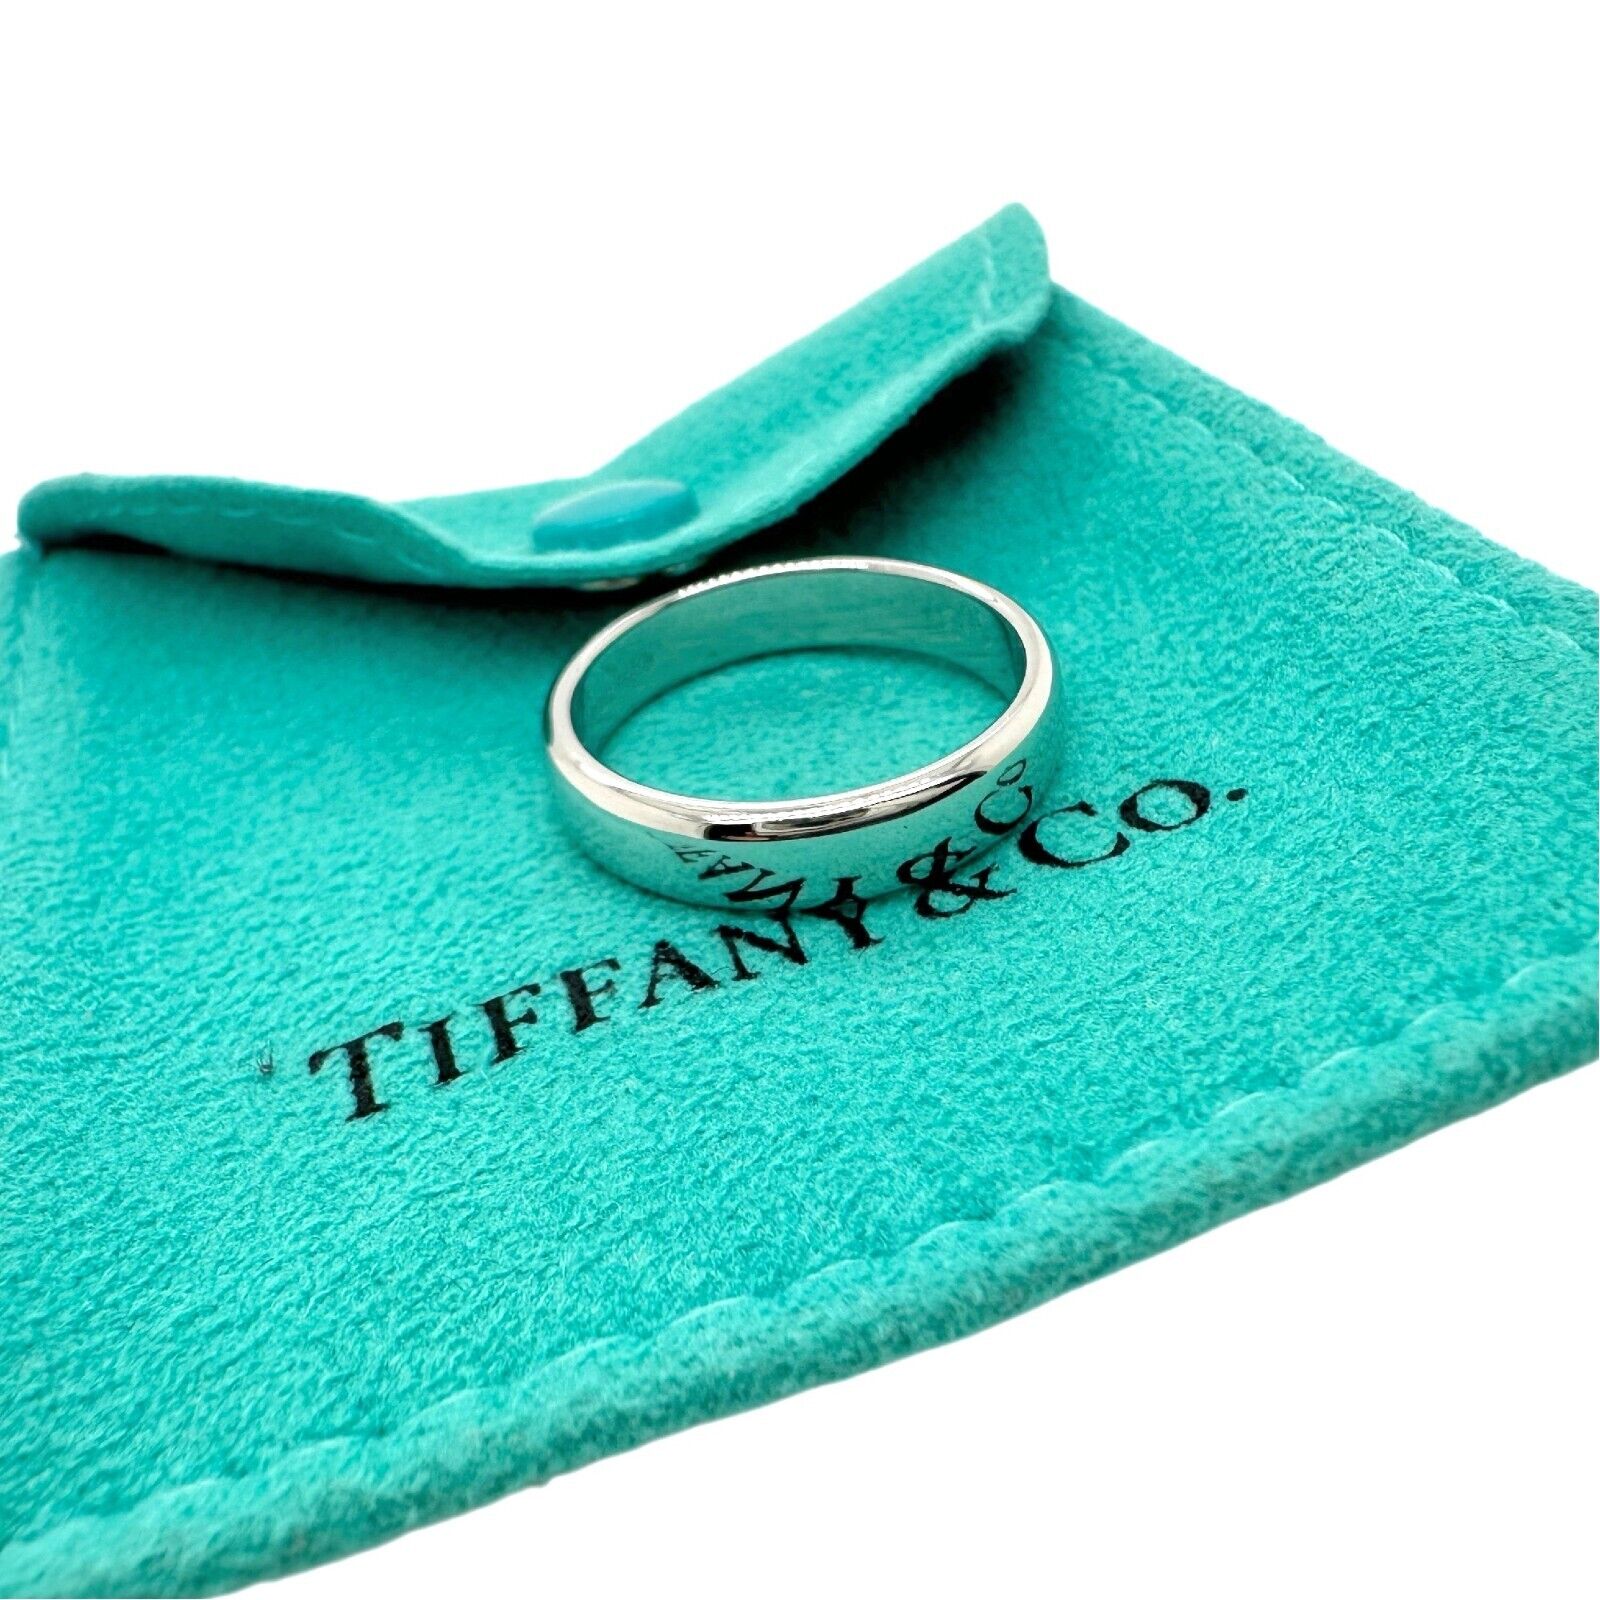 Tiffany Forever Wedding Band Ring in Platinum, 4.5 mm Wide | Tiffany & Co.